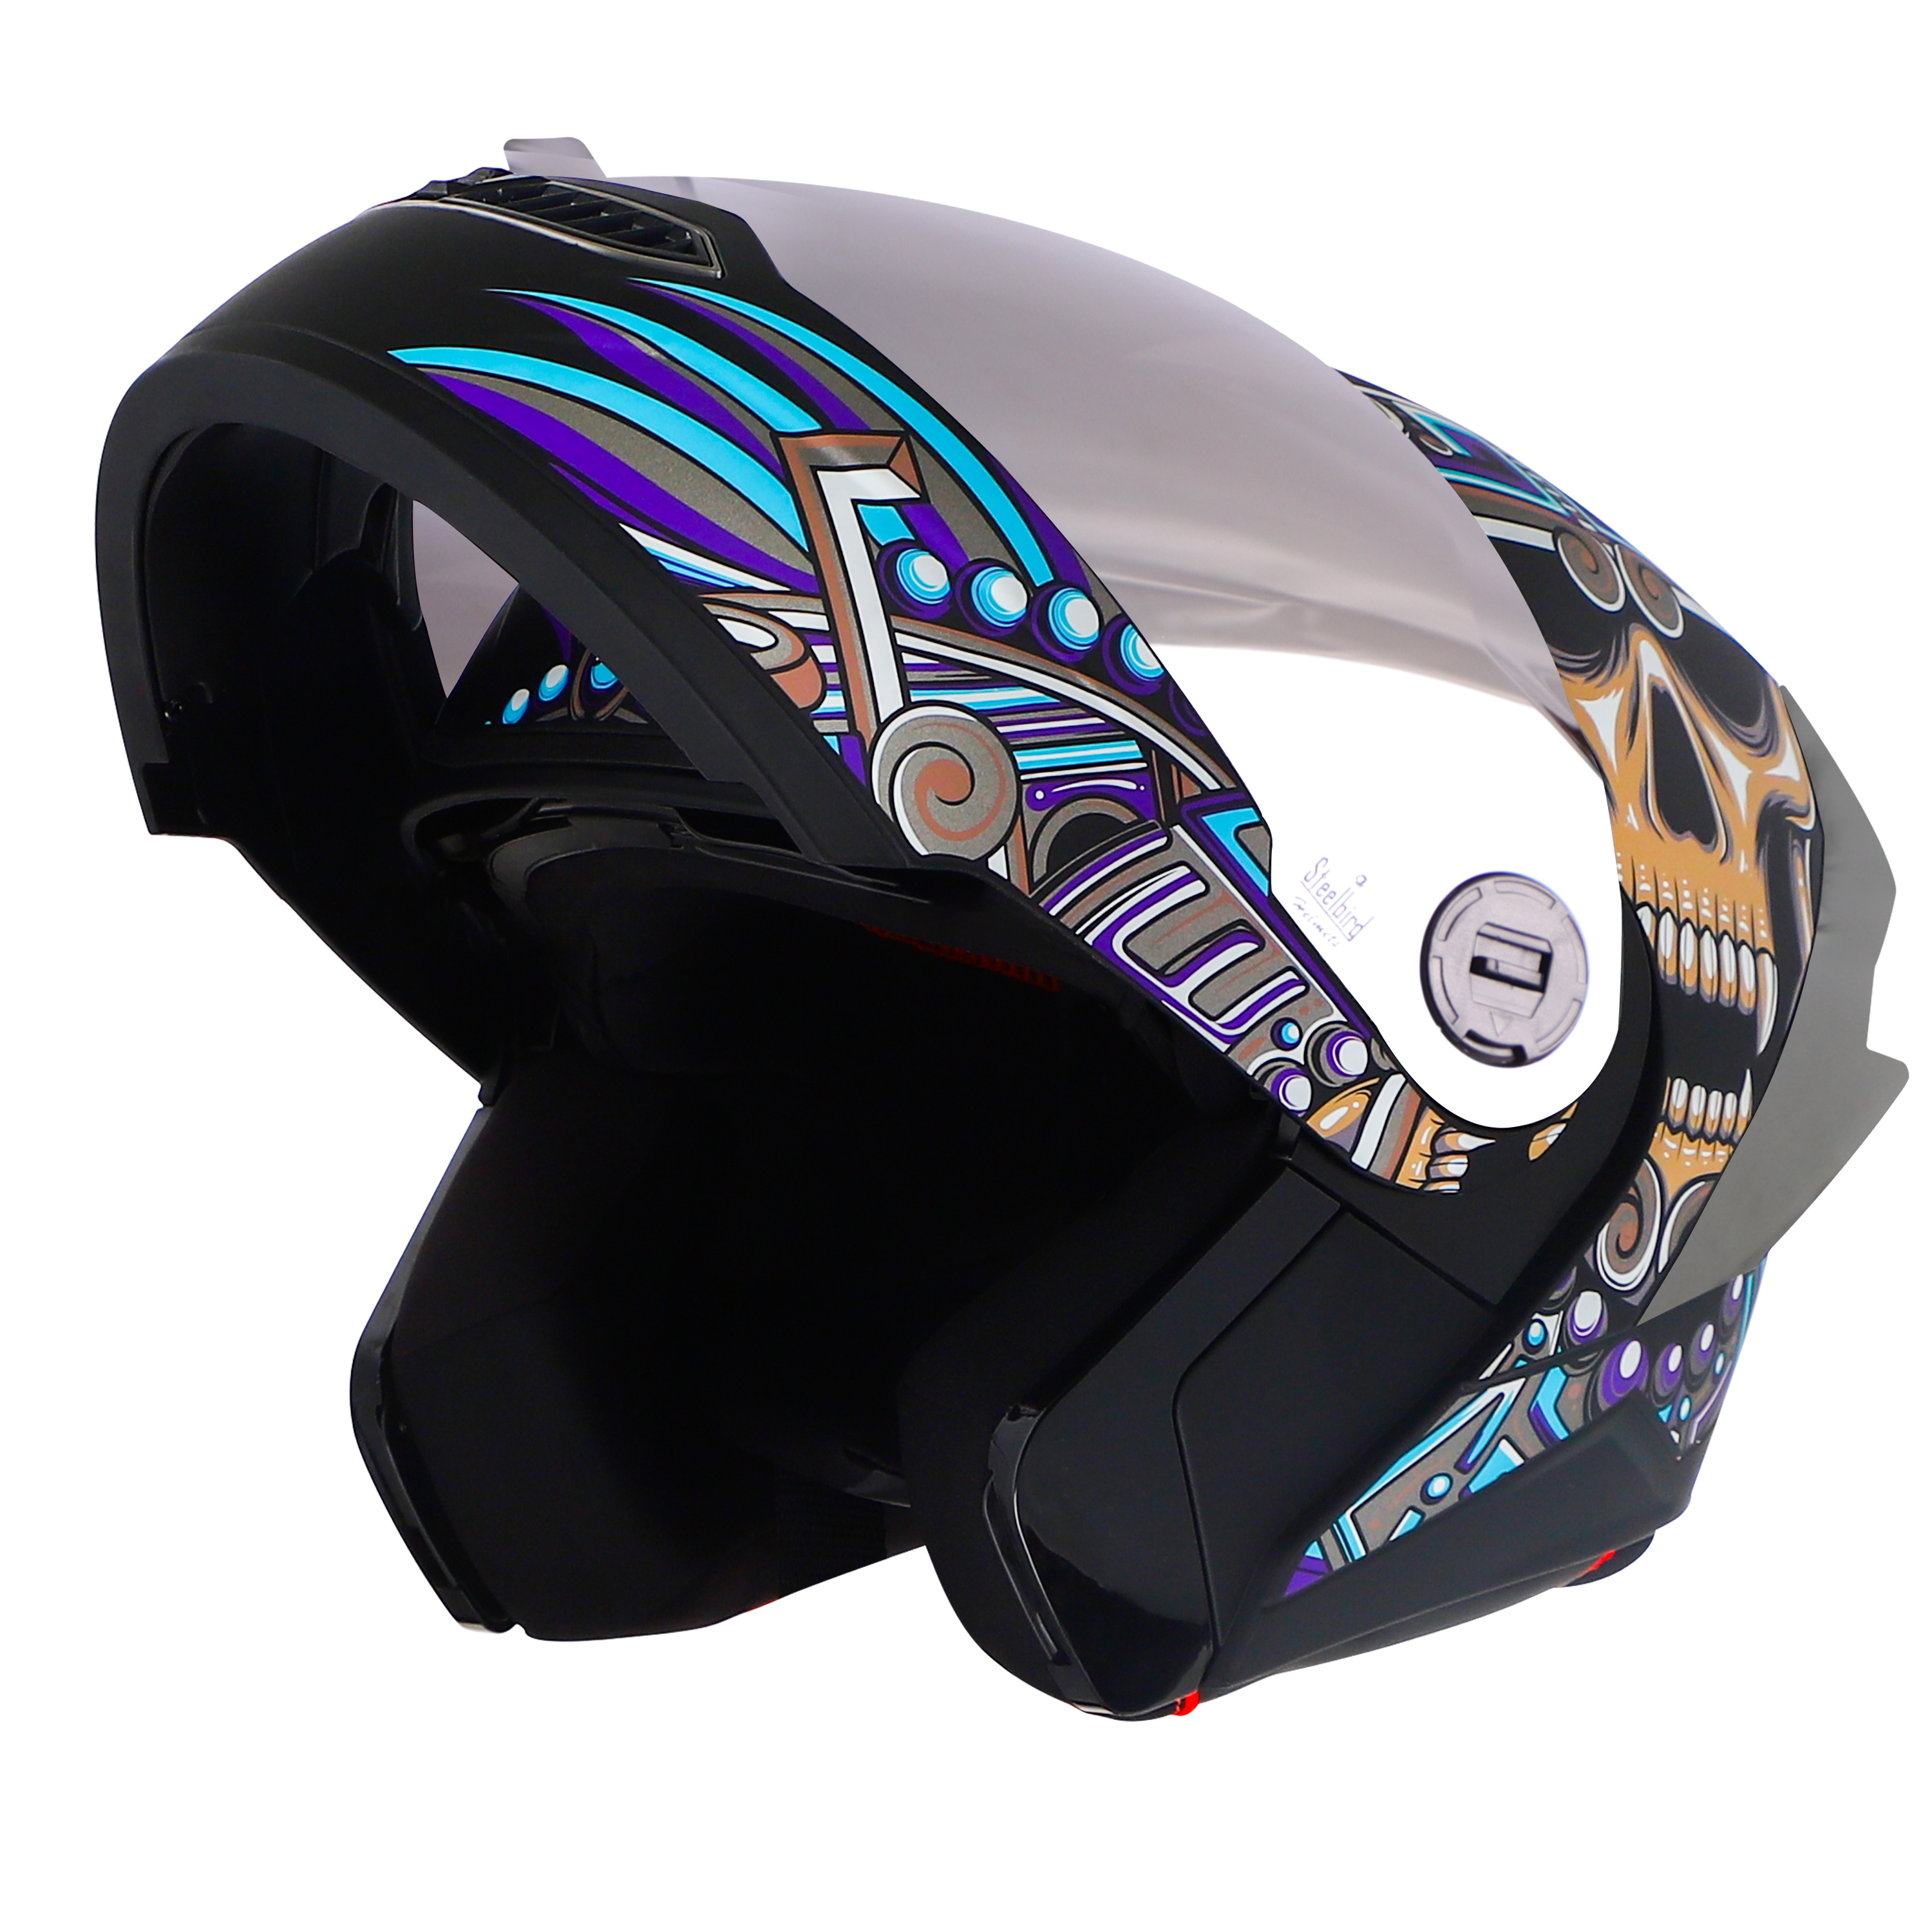 Steelbird SBA-8 Hunt ISI Certified Flip-Up Graphic Helmet For Men And Women (Glossy Black Jazz Blue With Silver Spoiler And Chrome Silver Visor)